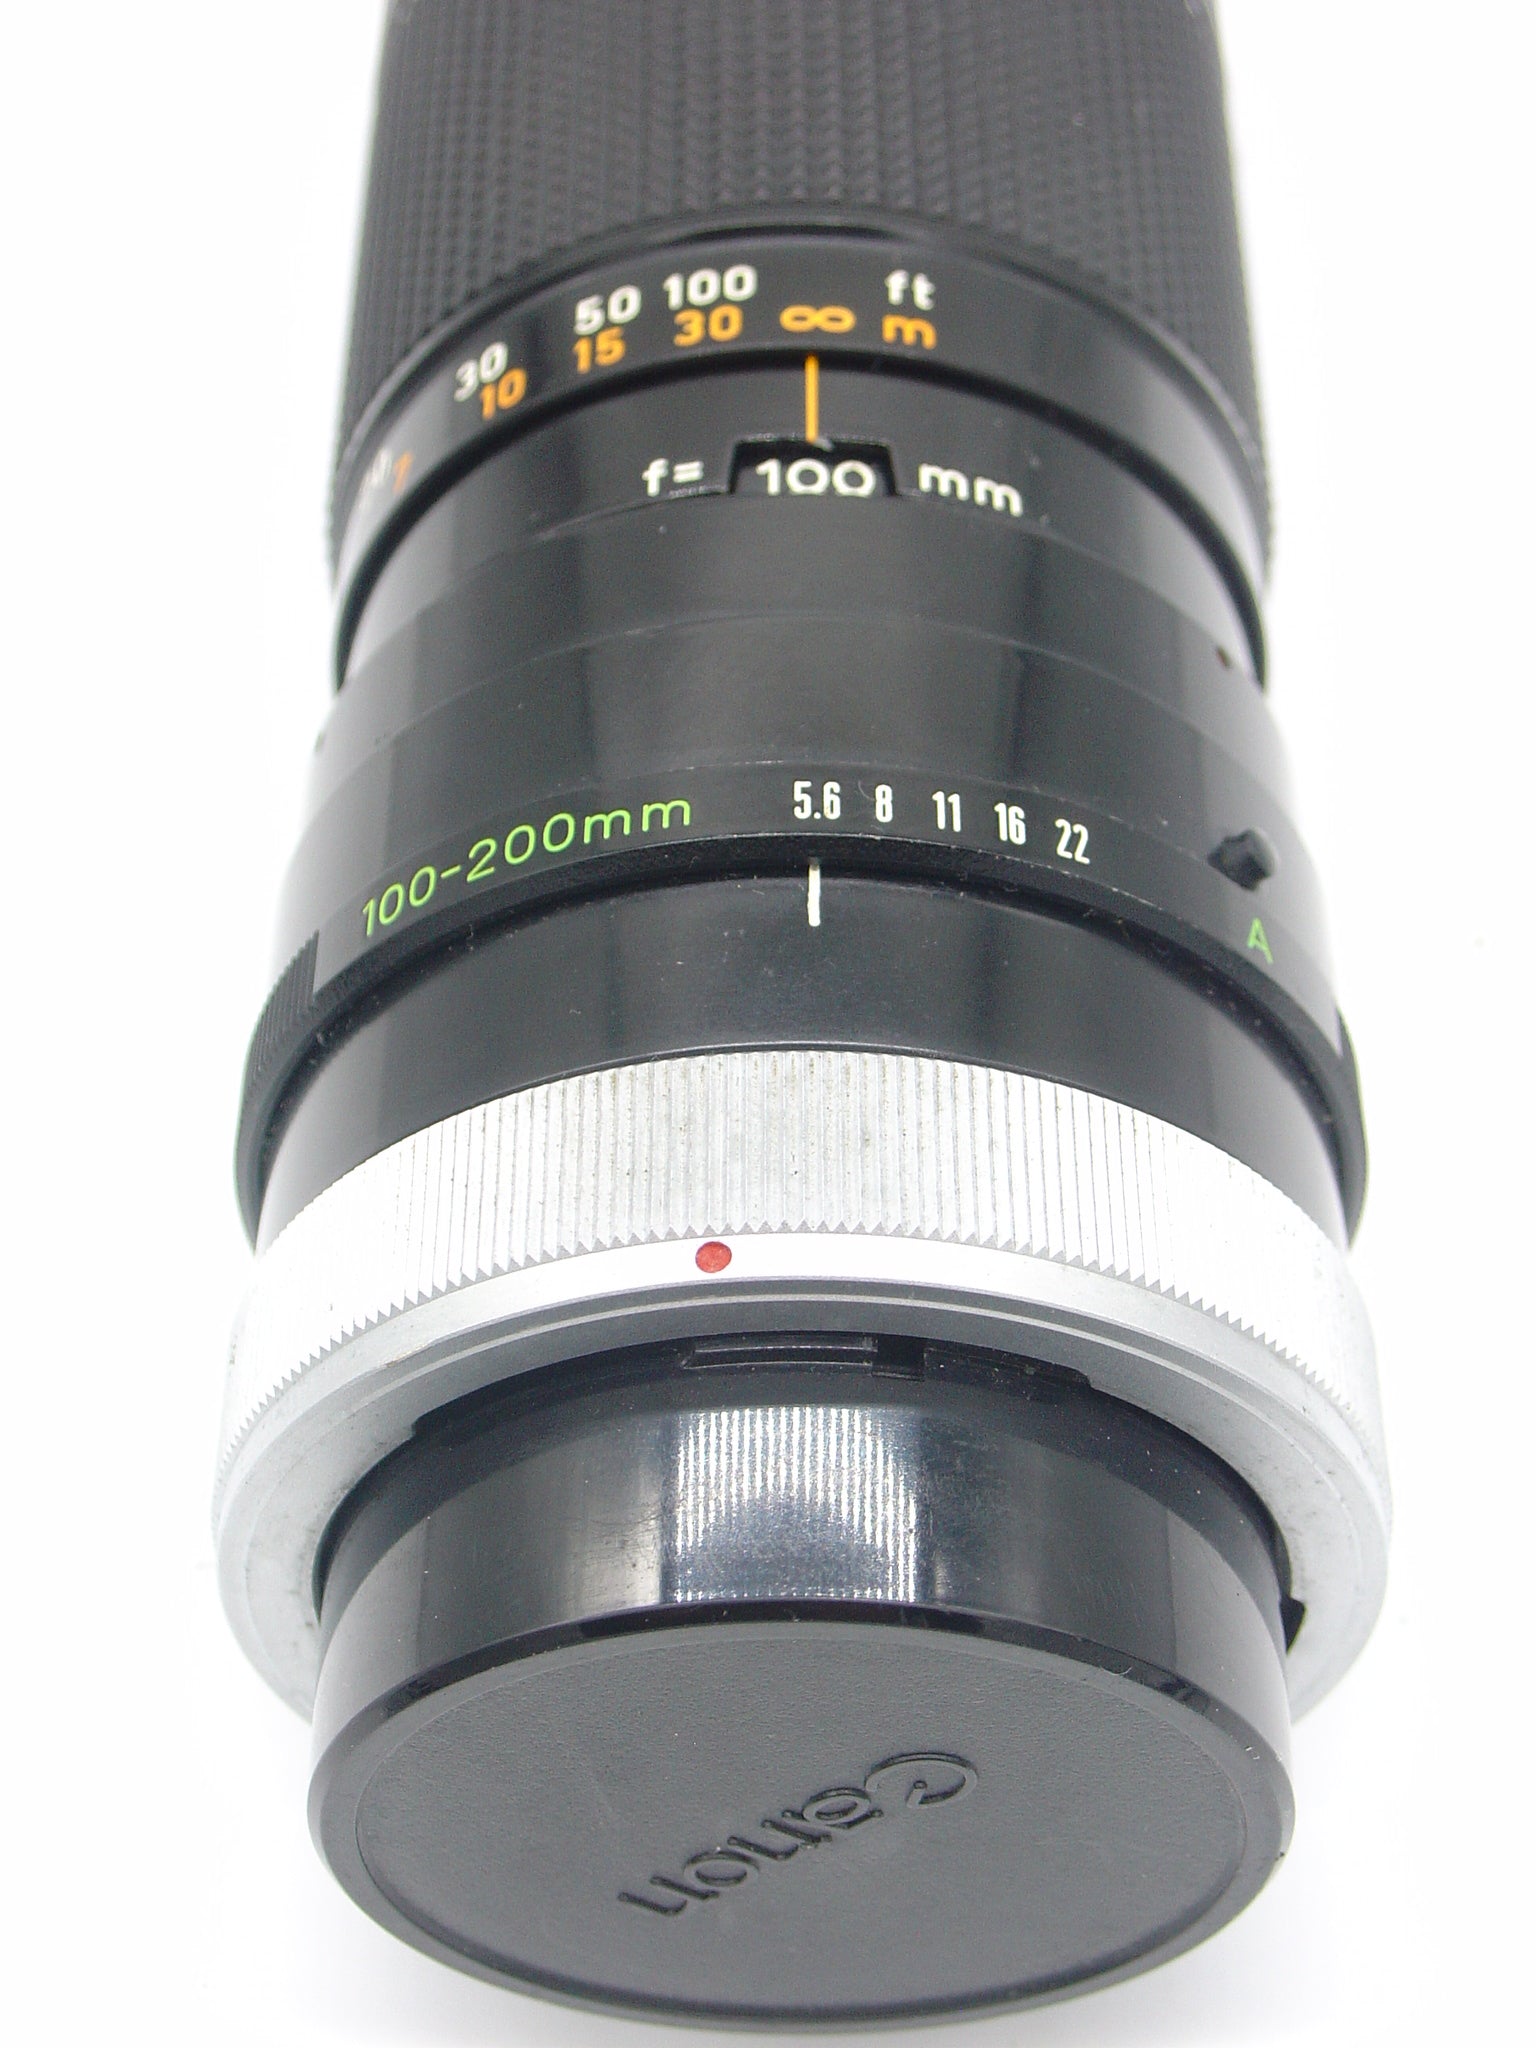 Canon ZOOM Lens FD 100-200mm 1:5.6